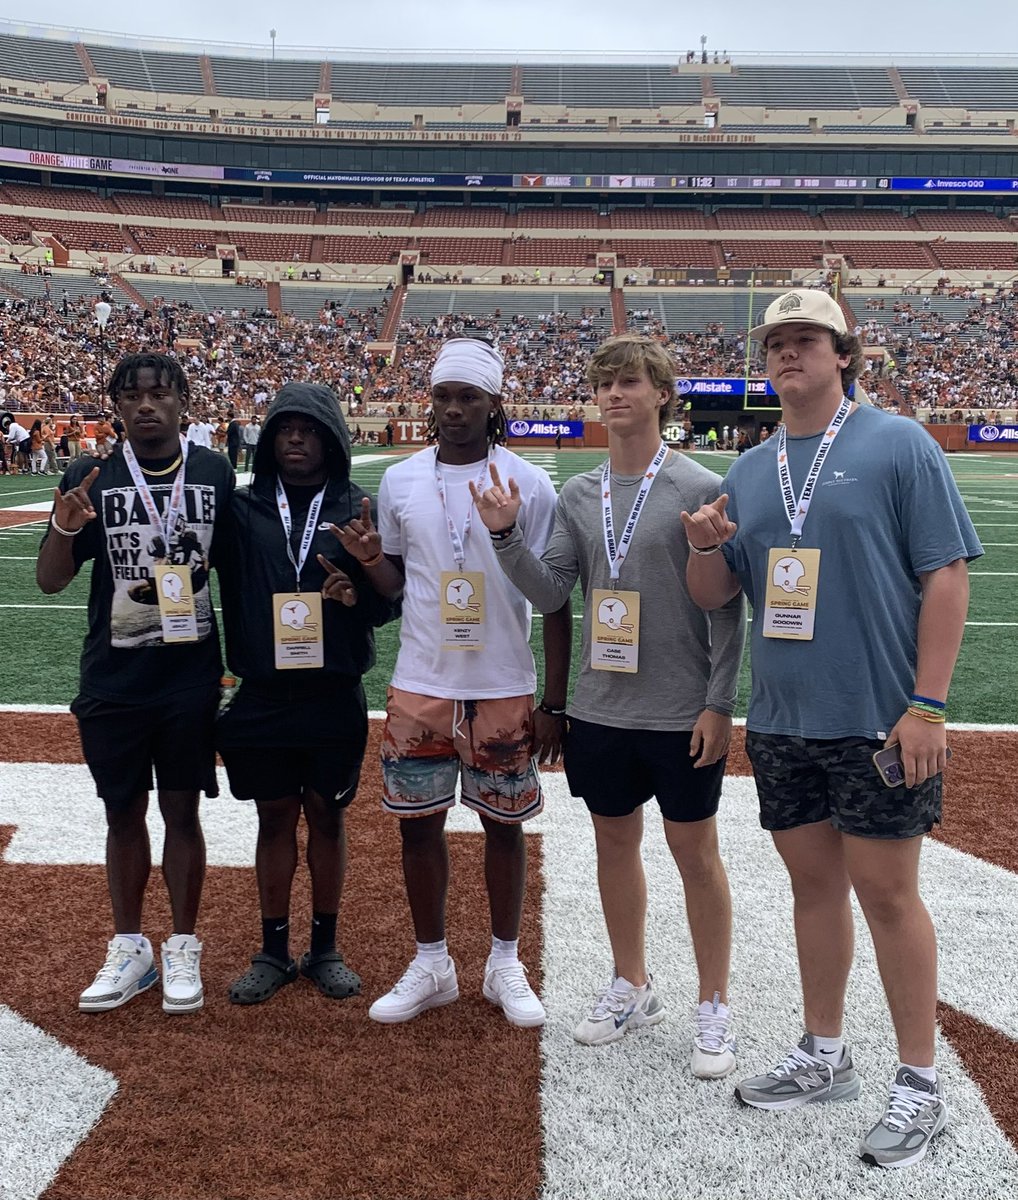 Appreciate all the love that @TexasFootball showed, I appreciate you @coachchoice @Coach_Gideon @KJJFlood for all the hospitality and they really enjoyed the spring game. From L ➡️ R @AshleyBallers @Darrellsmith_4 @iamkenzywest @case_thomas10 @gunnargoodwin